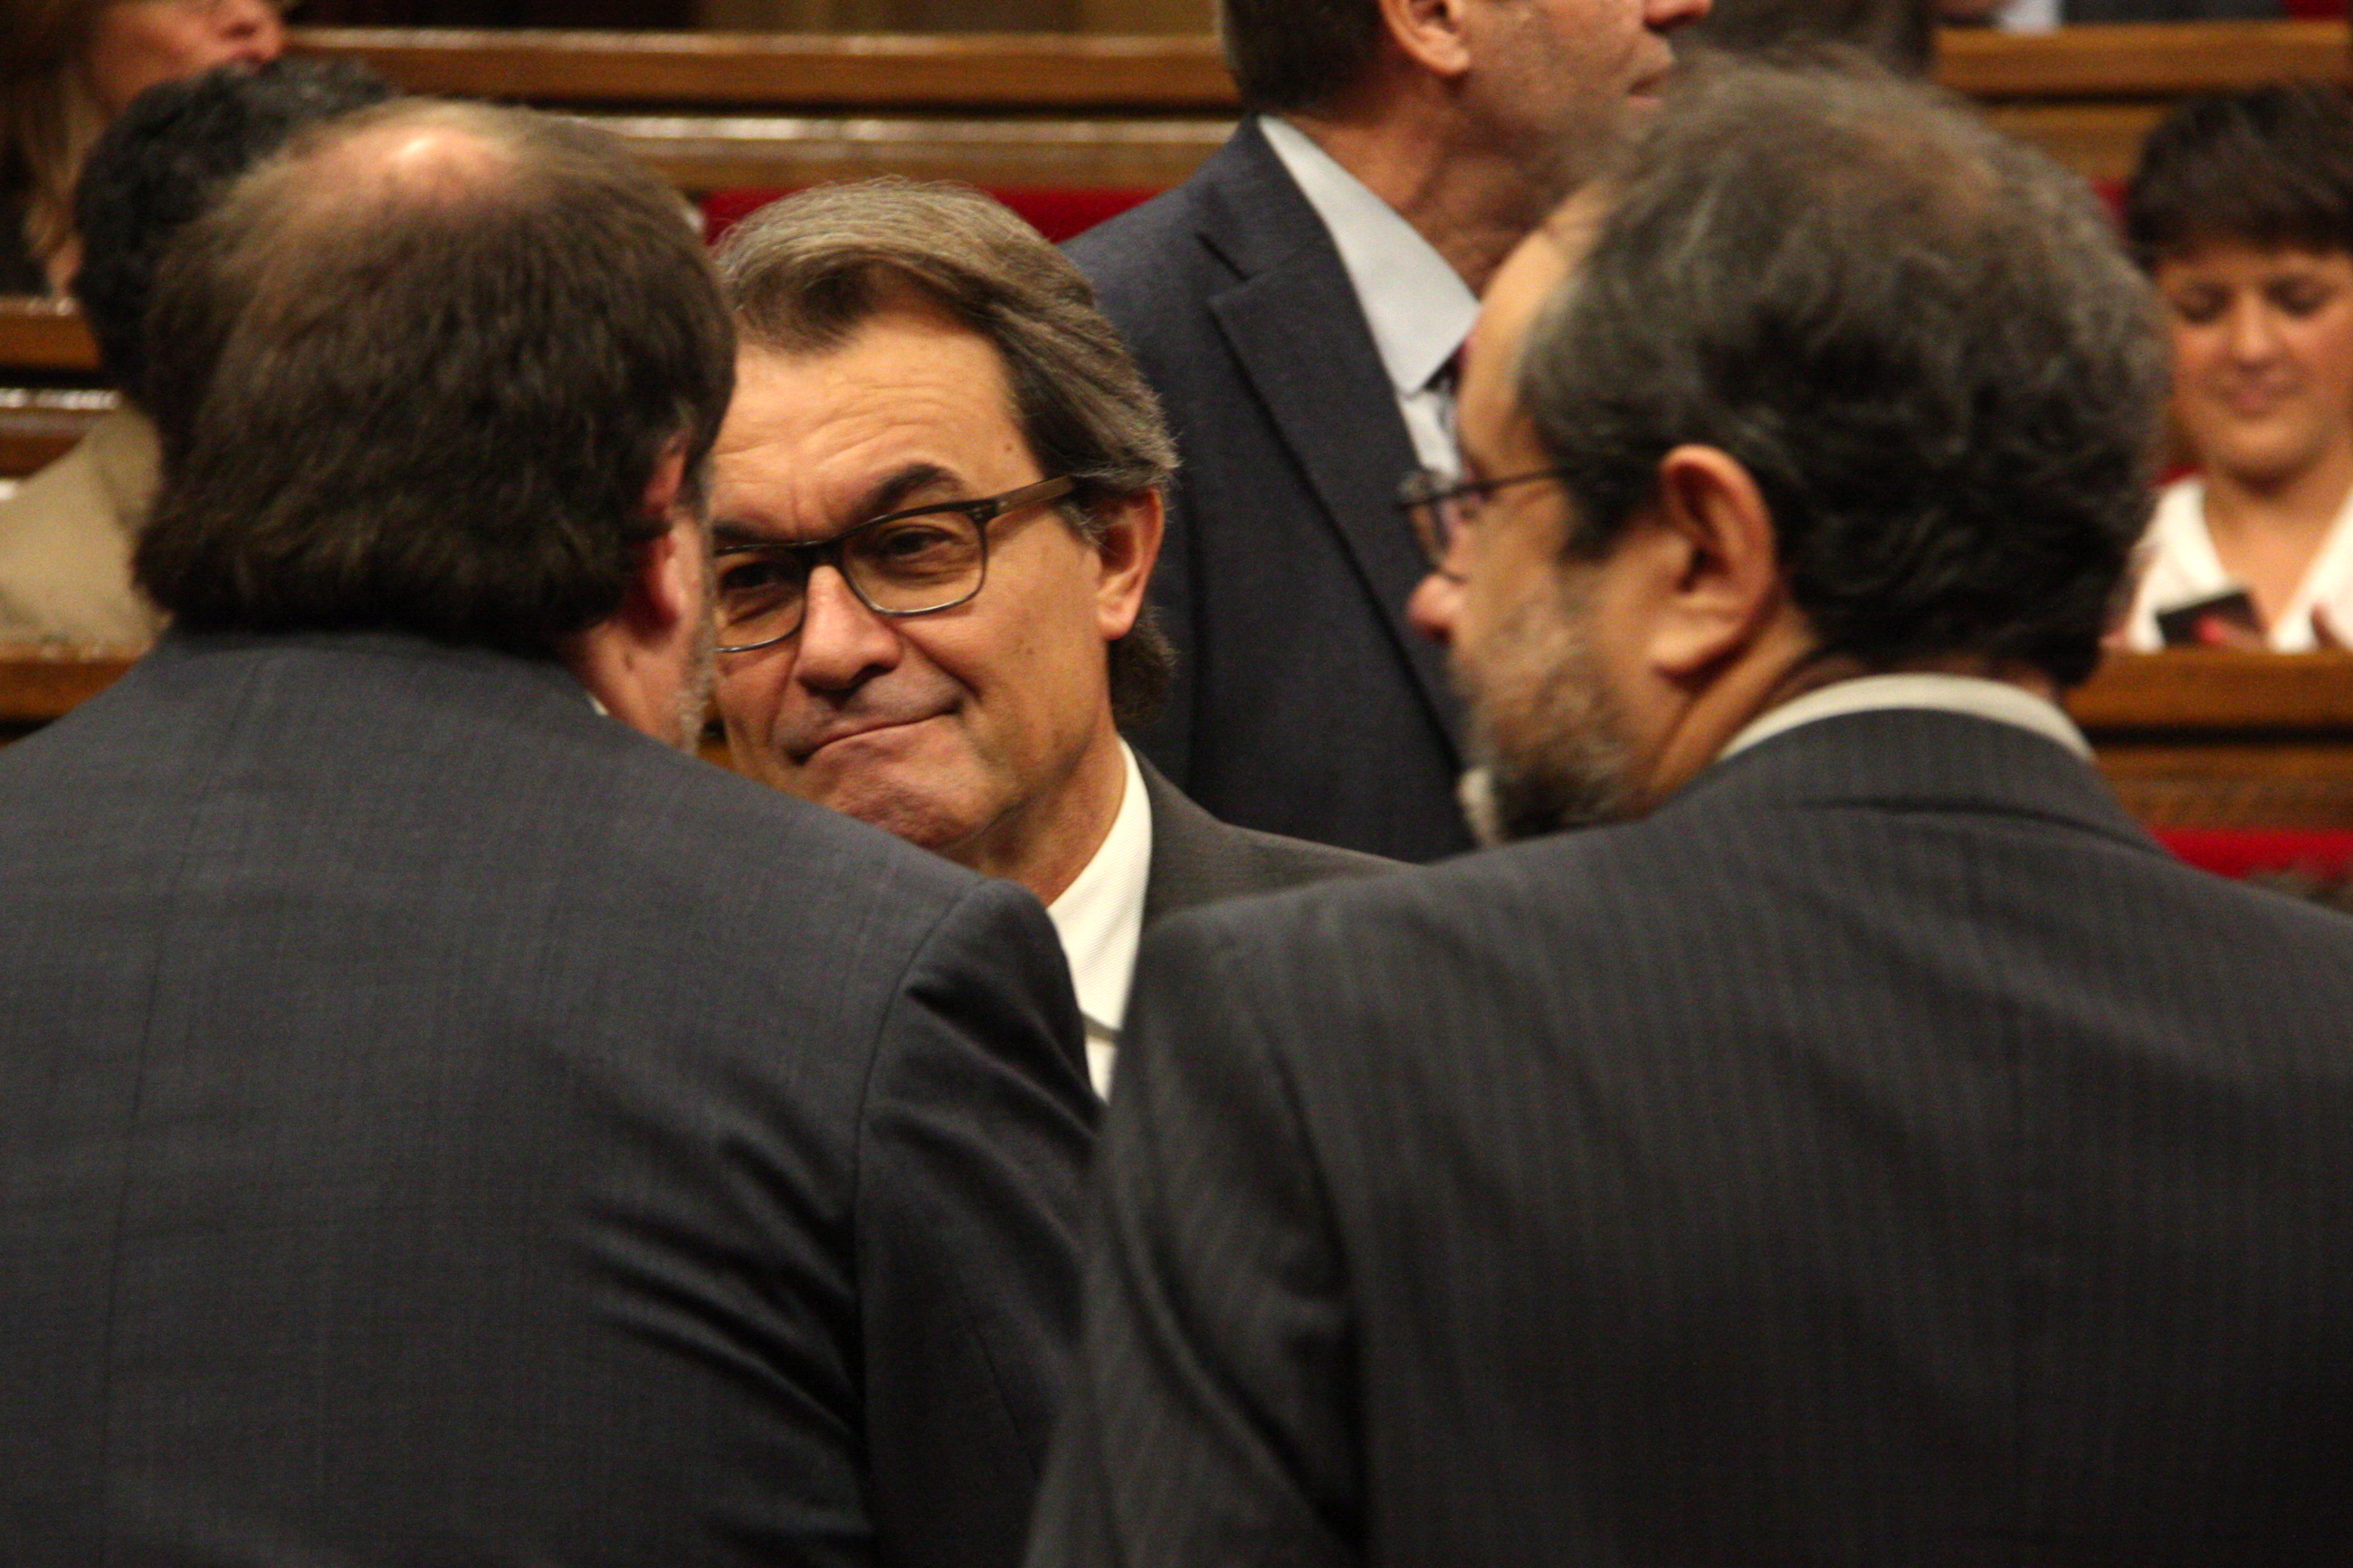 Current President Artur Mas talking to left-wing pro-independence ERC's leader, Oriol Junqueras and radical left CUP's top member, Antonio Baños, this Thursday in the Parliament (by ACN)